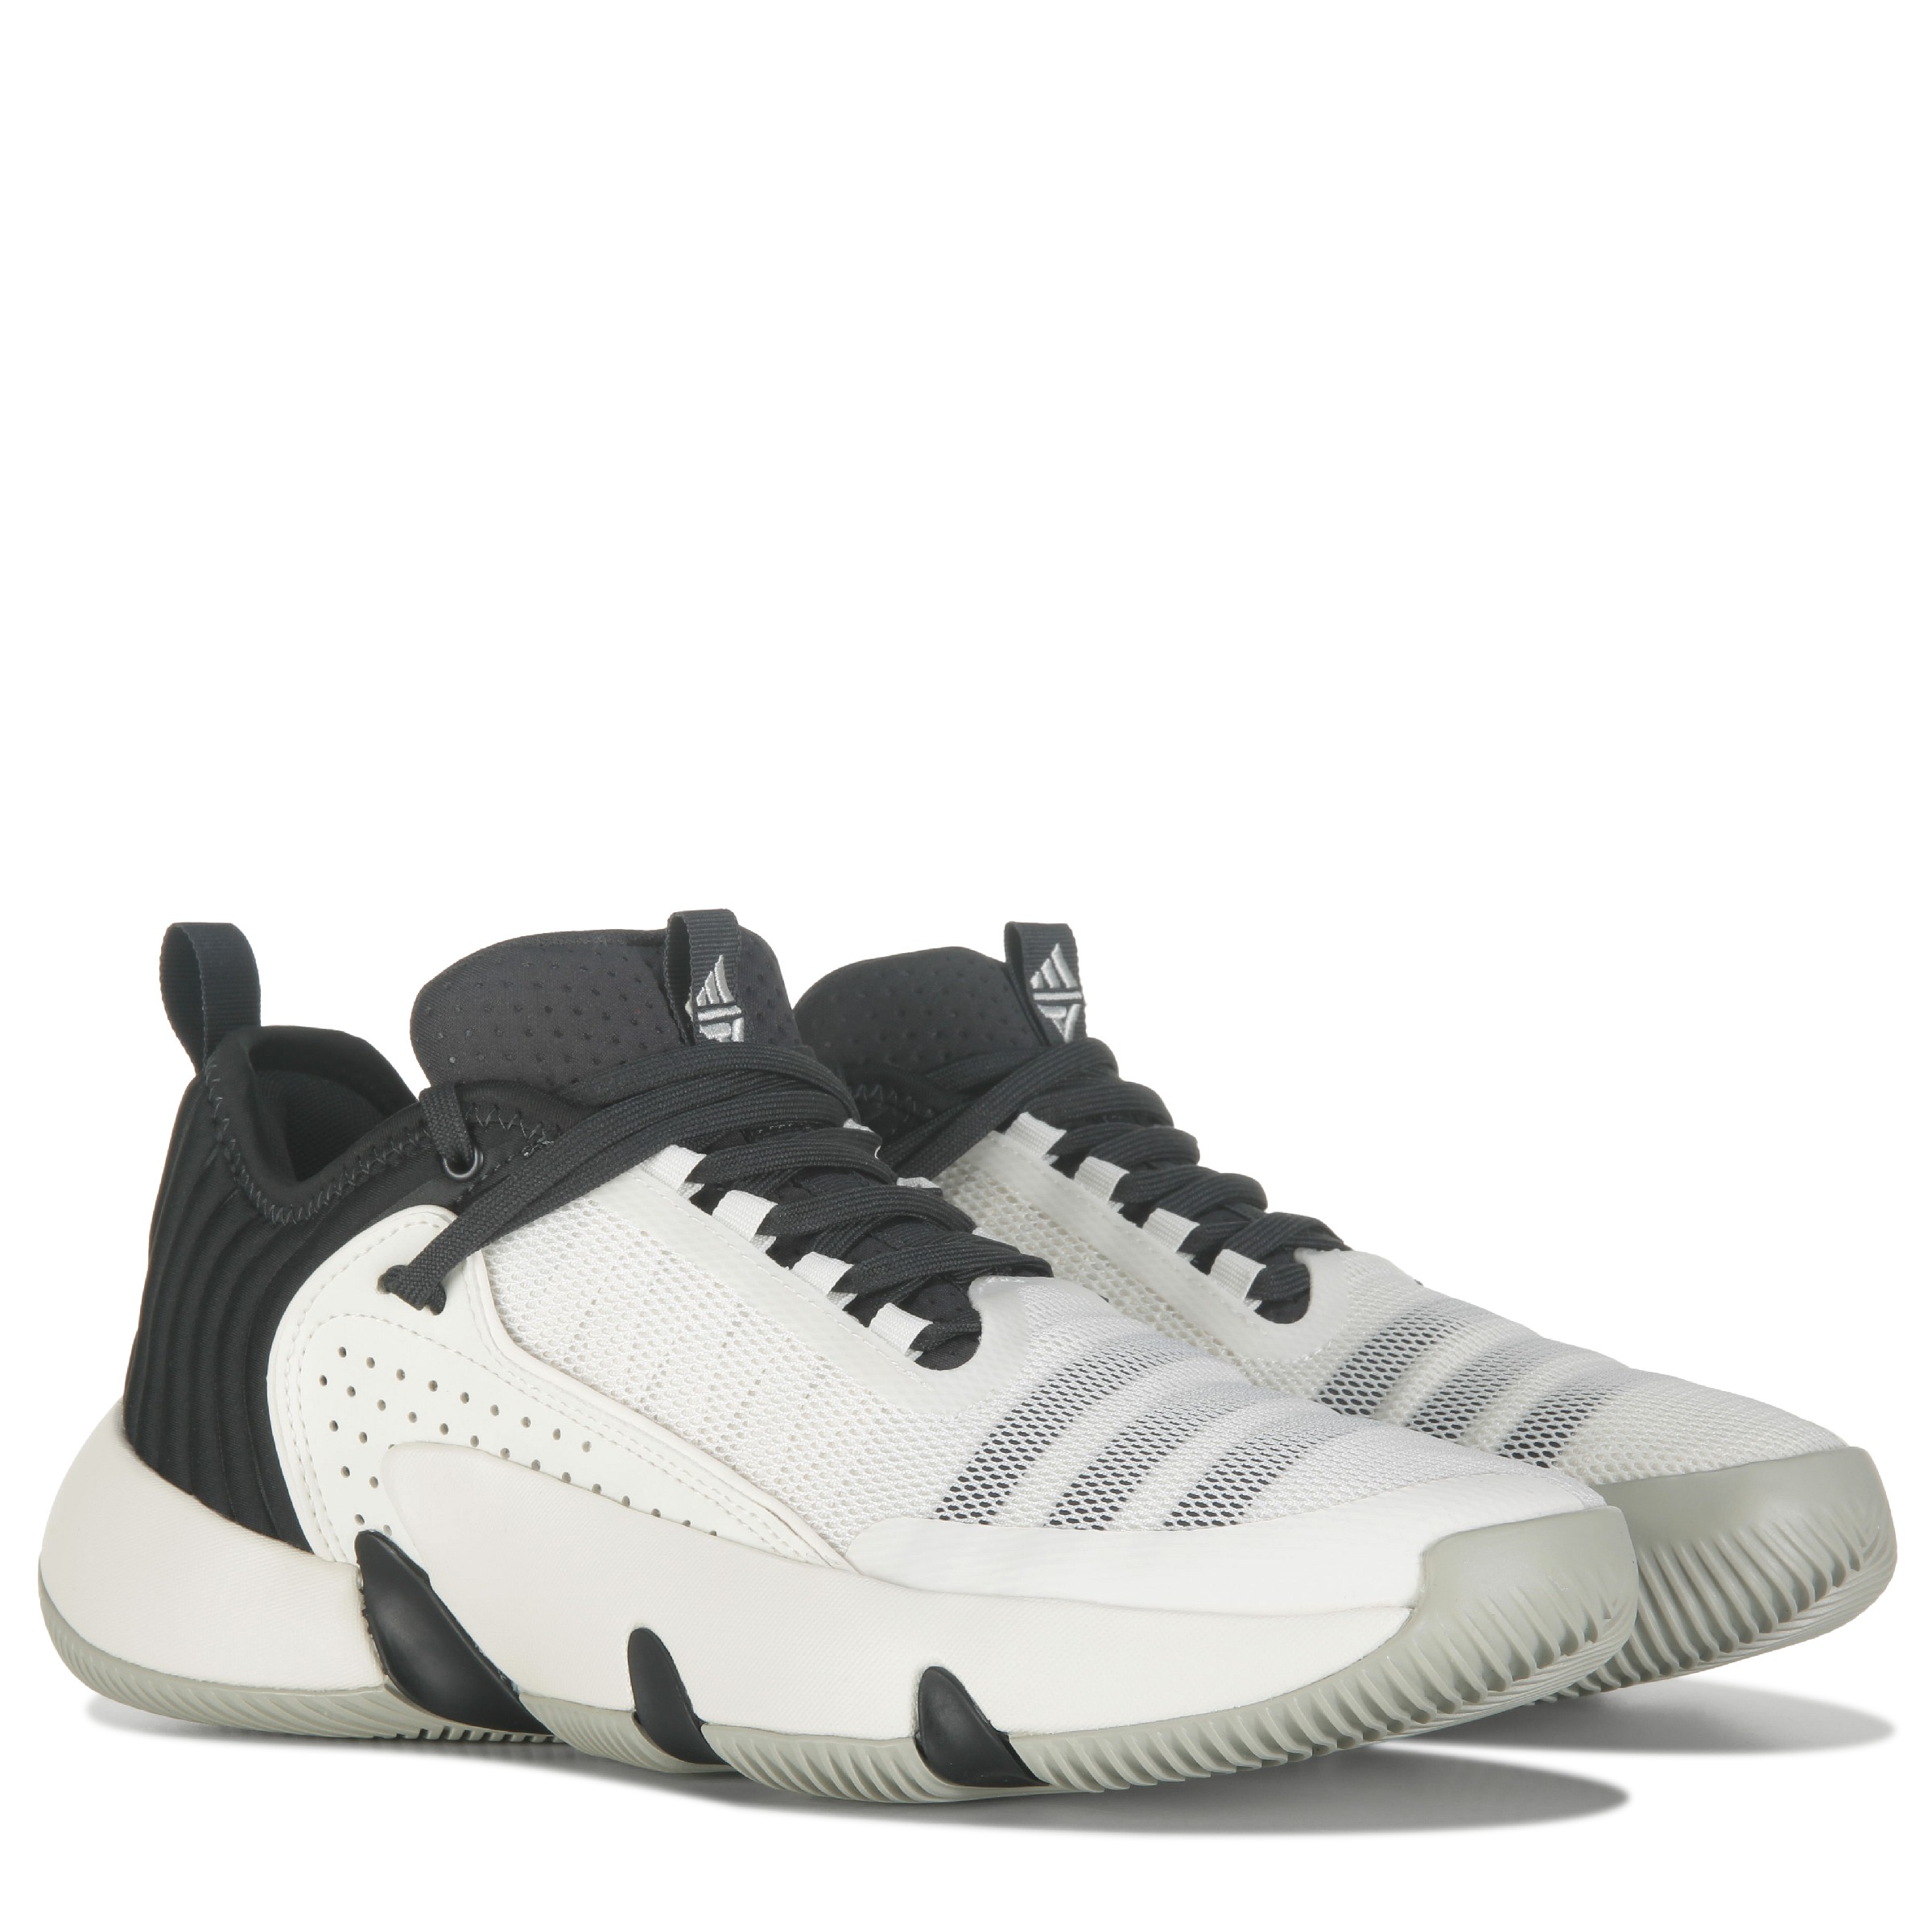 Adidas Men's Trae Unlimited Basketball Shoes, Black/White / 10.5